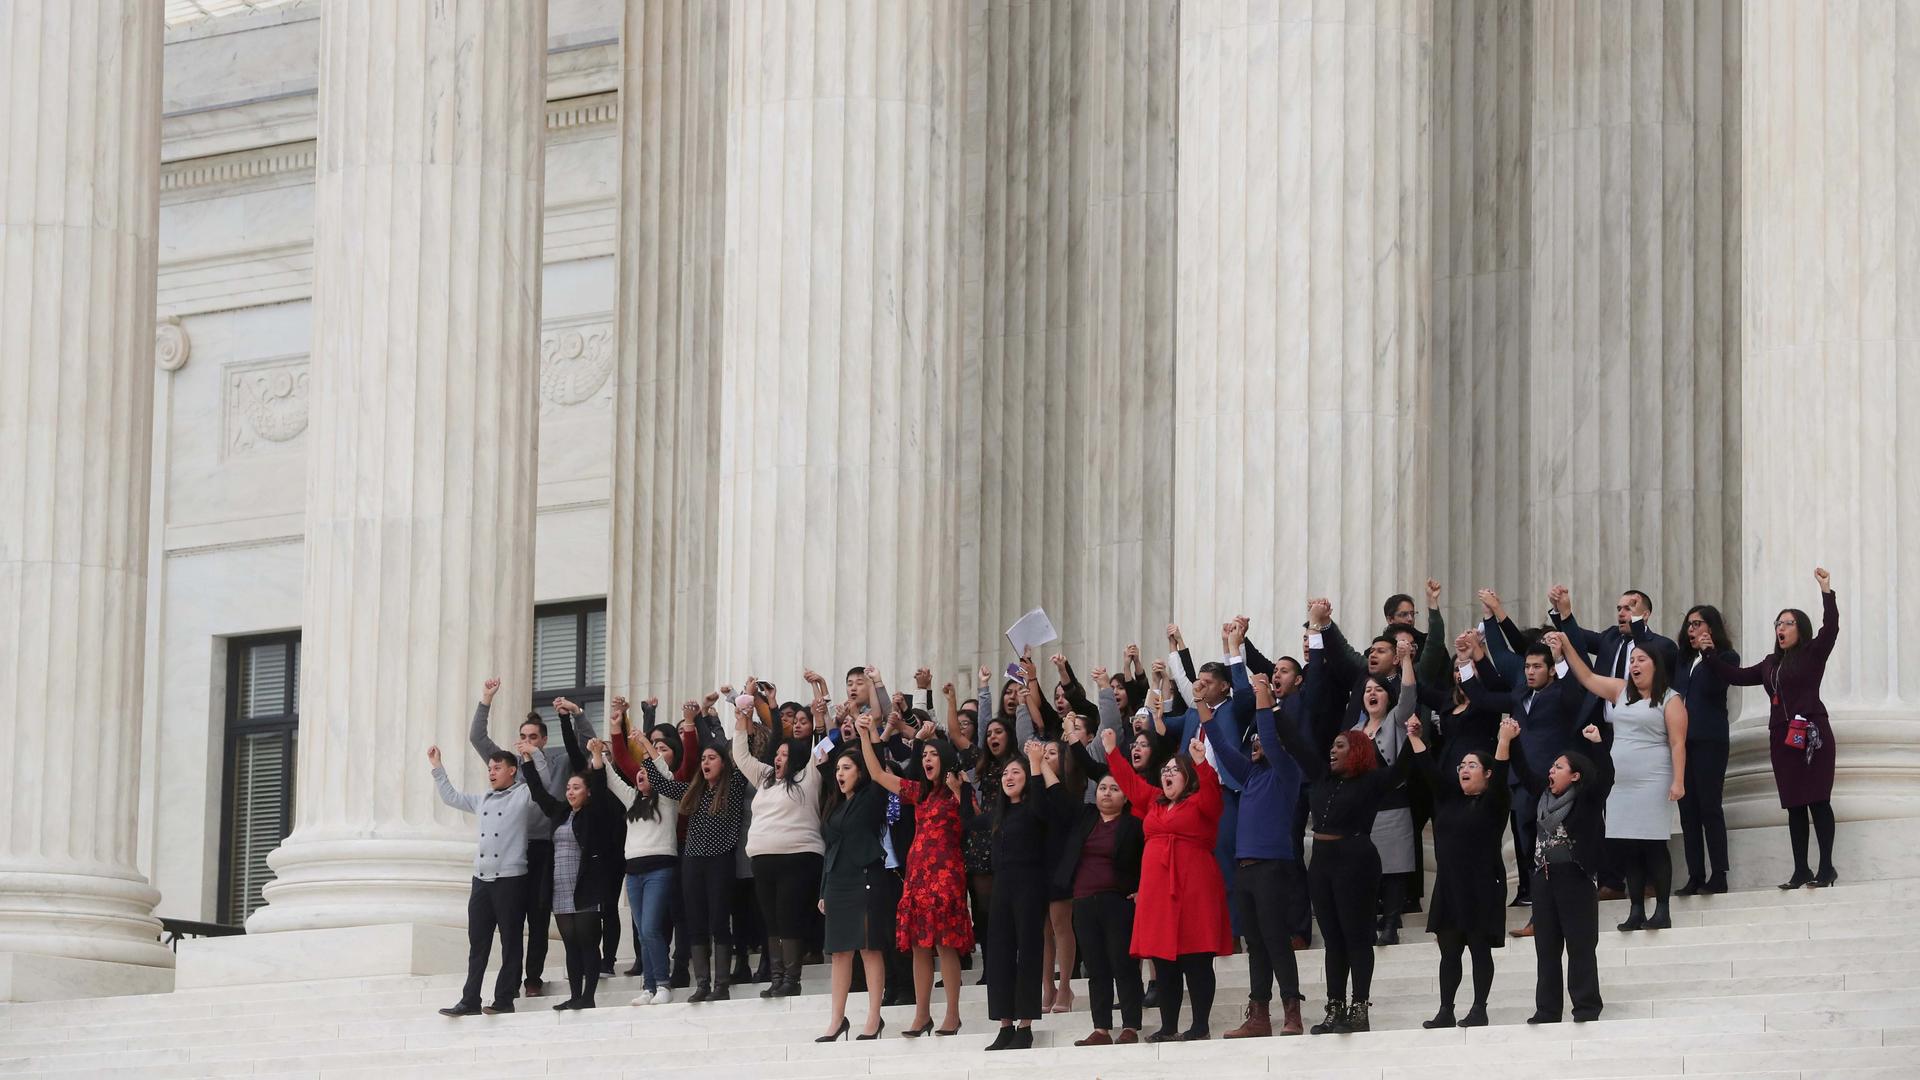 DACA plaintiffs walk arm-in-arm down from the US Supreme Court after justices heard oral arguments in the consolidation of three cases before the court regarding the Trump administration’s bid to end the DACA program on Nov. 12, 2019.